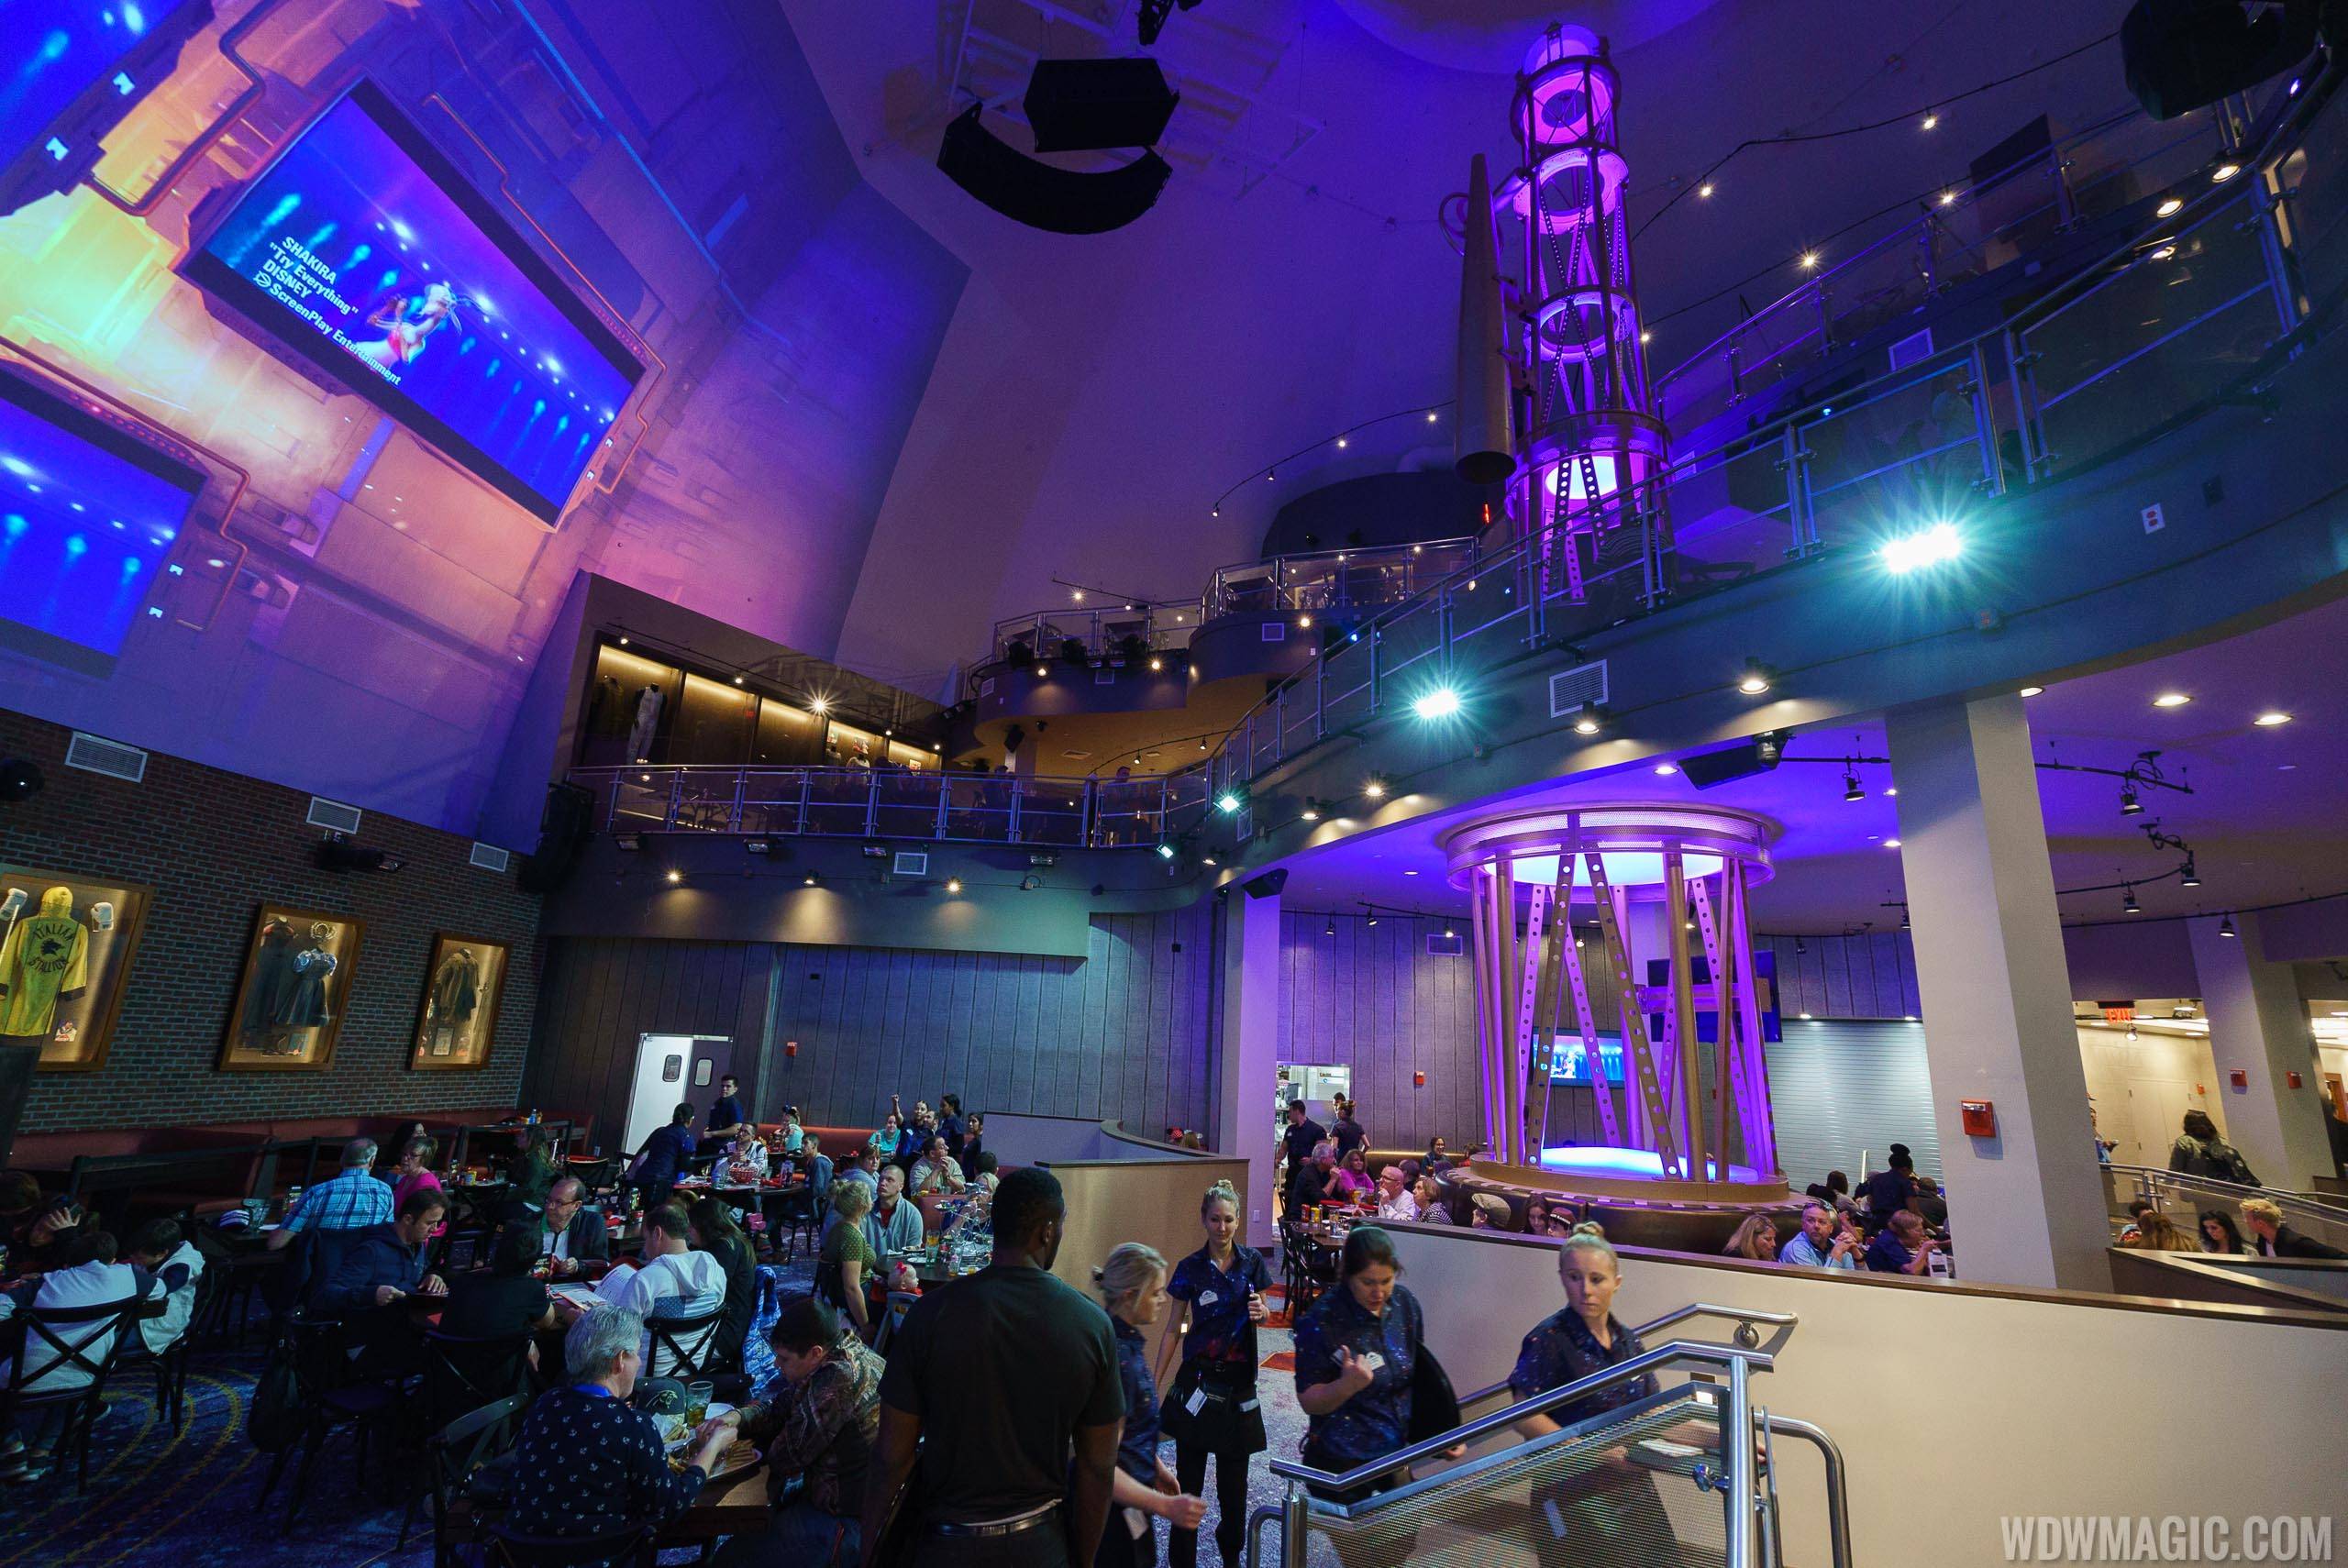 Planet Hollywood Observatory - Lower level dining room